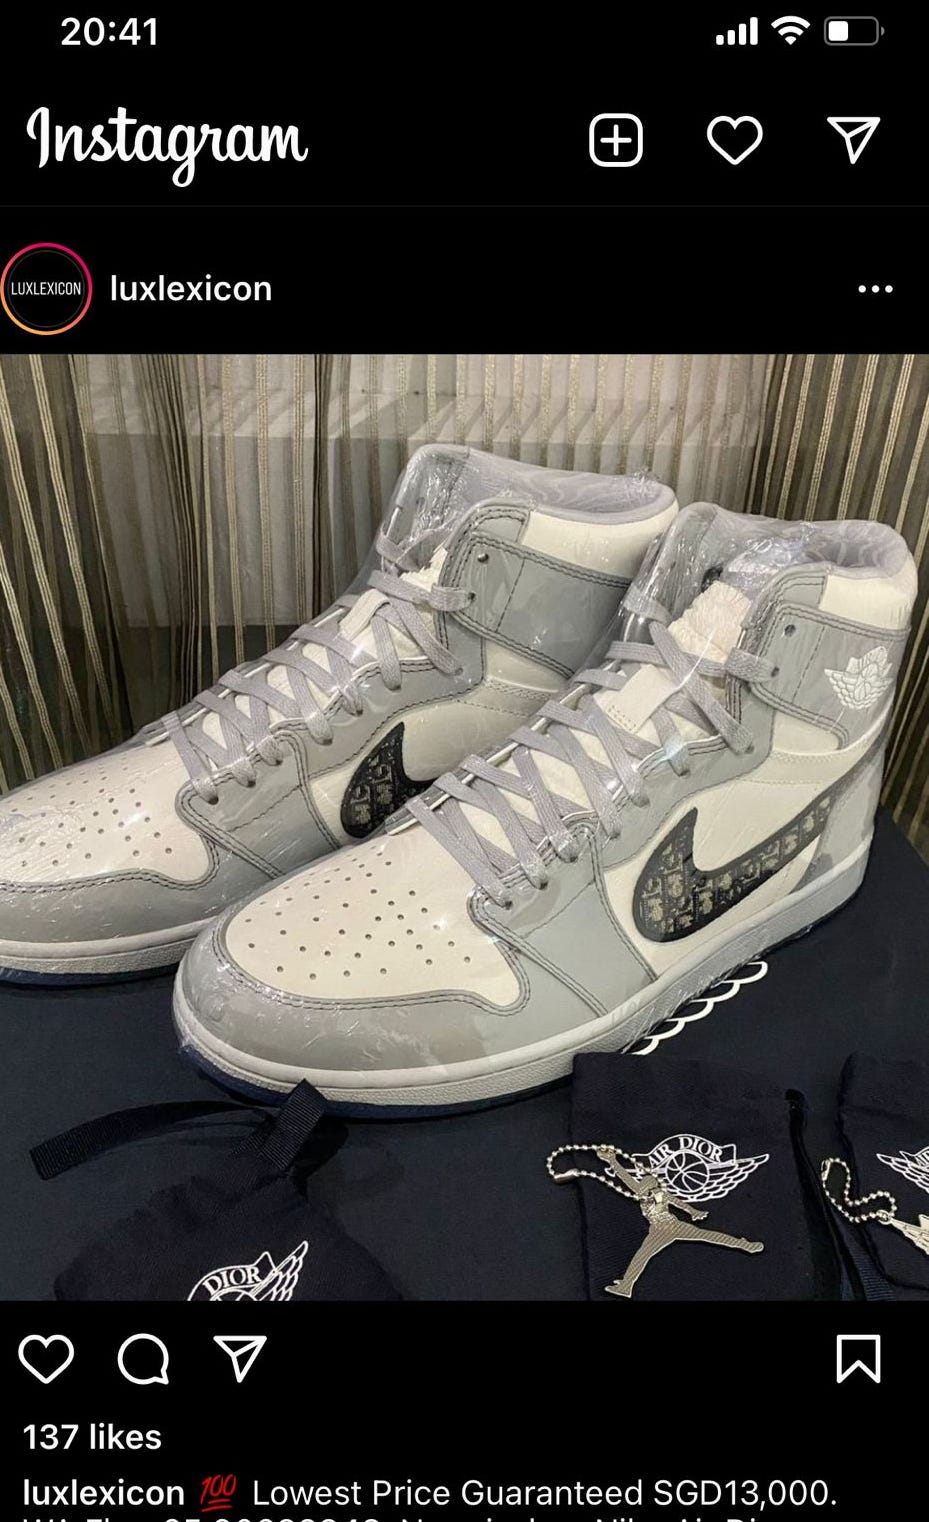 $13,000 for a pair of sneakers?